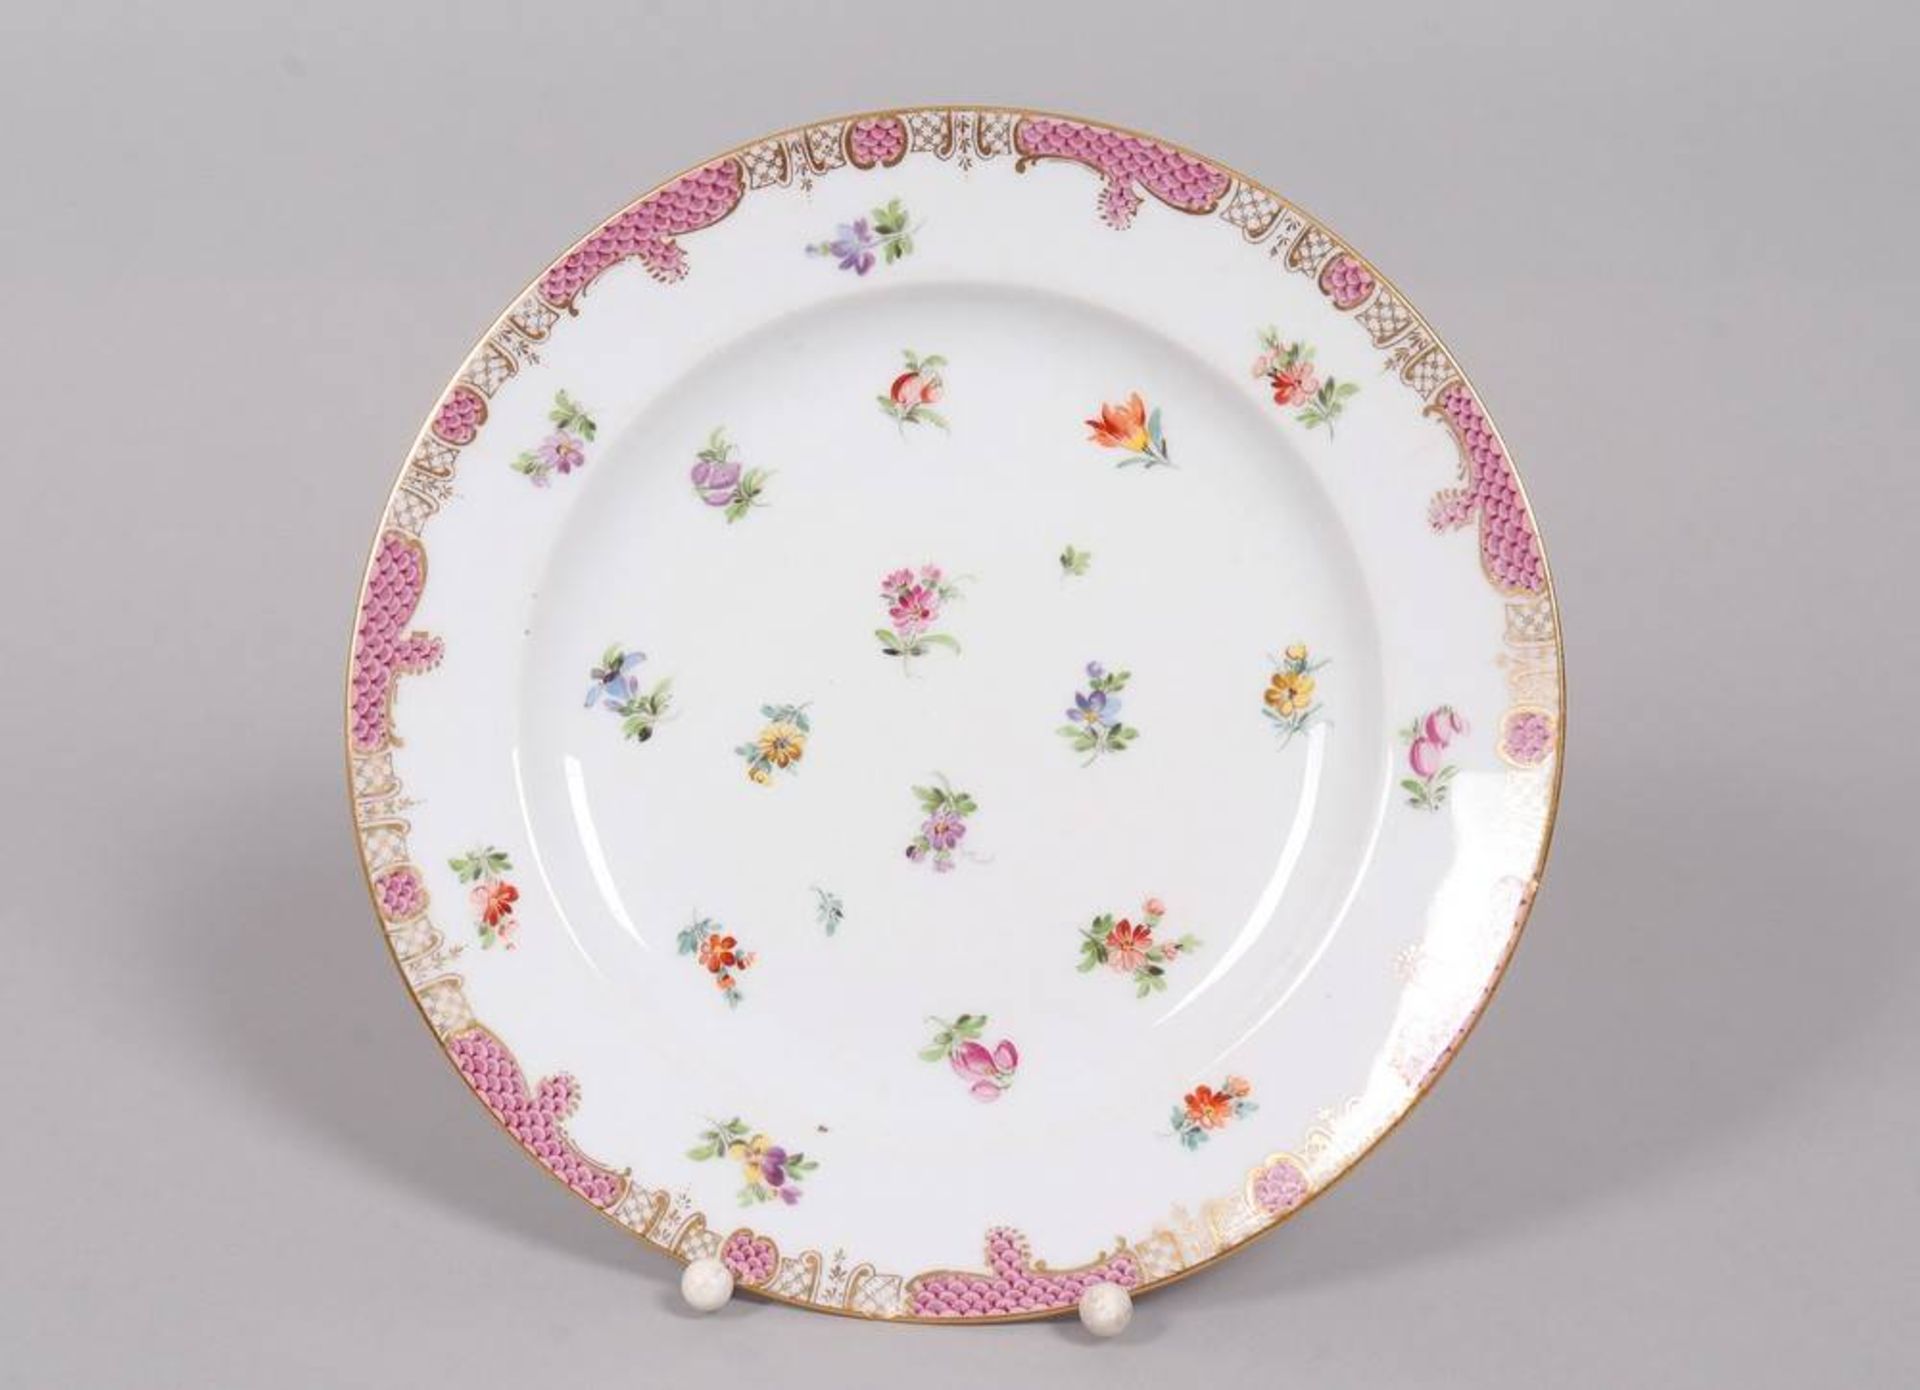 Plate, Meissen, early 19th C., "Streublümchen" decor with purple scale pattern